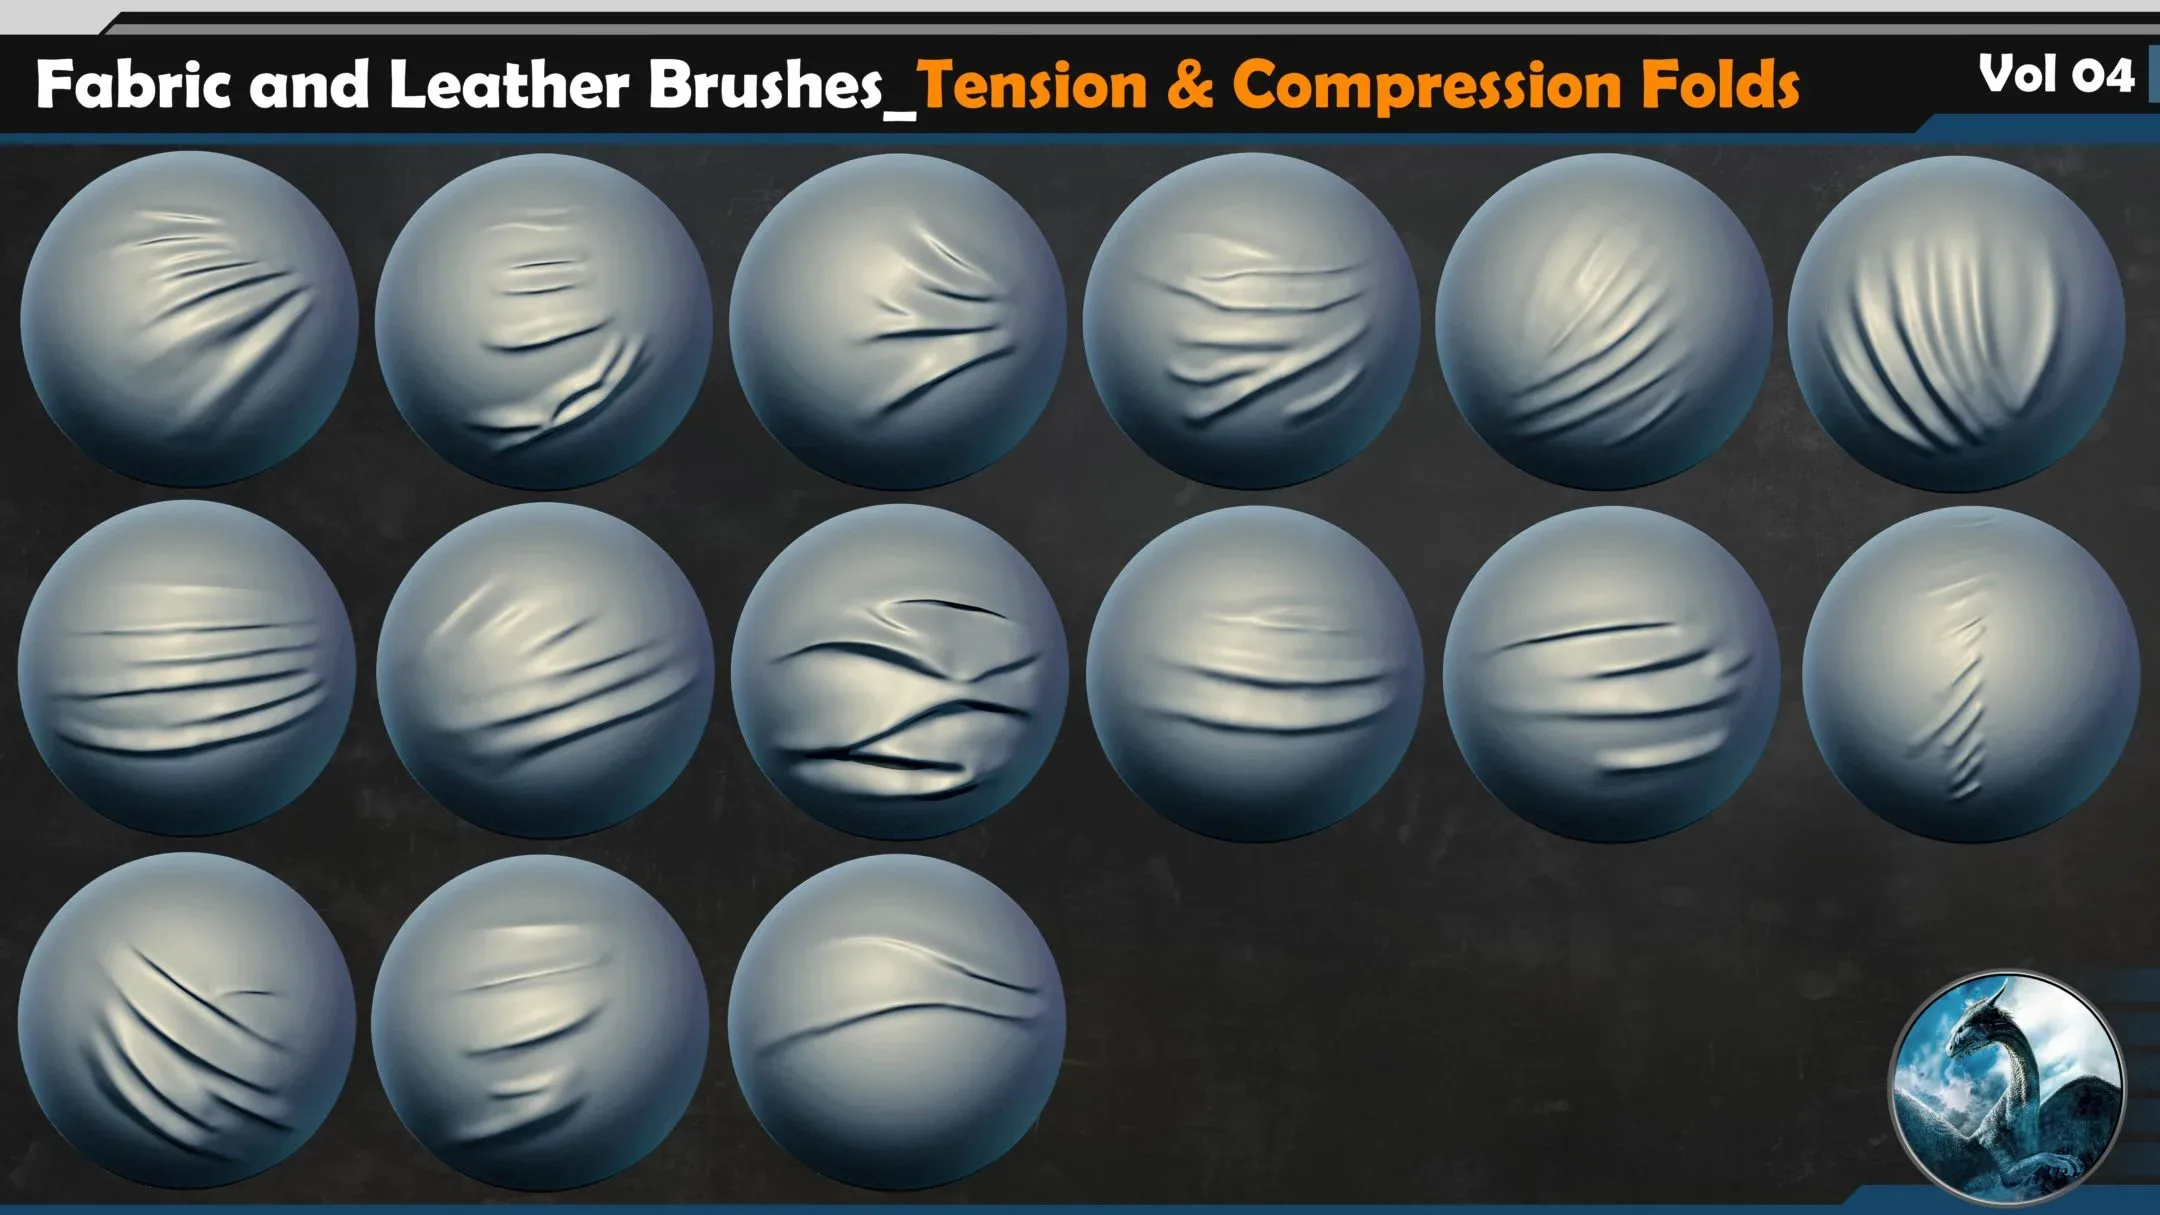 Fabric and Leather Brushes Vol 04